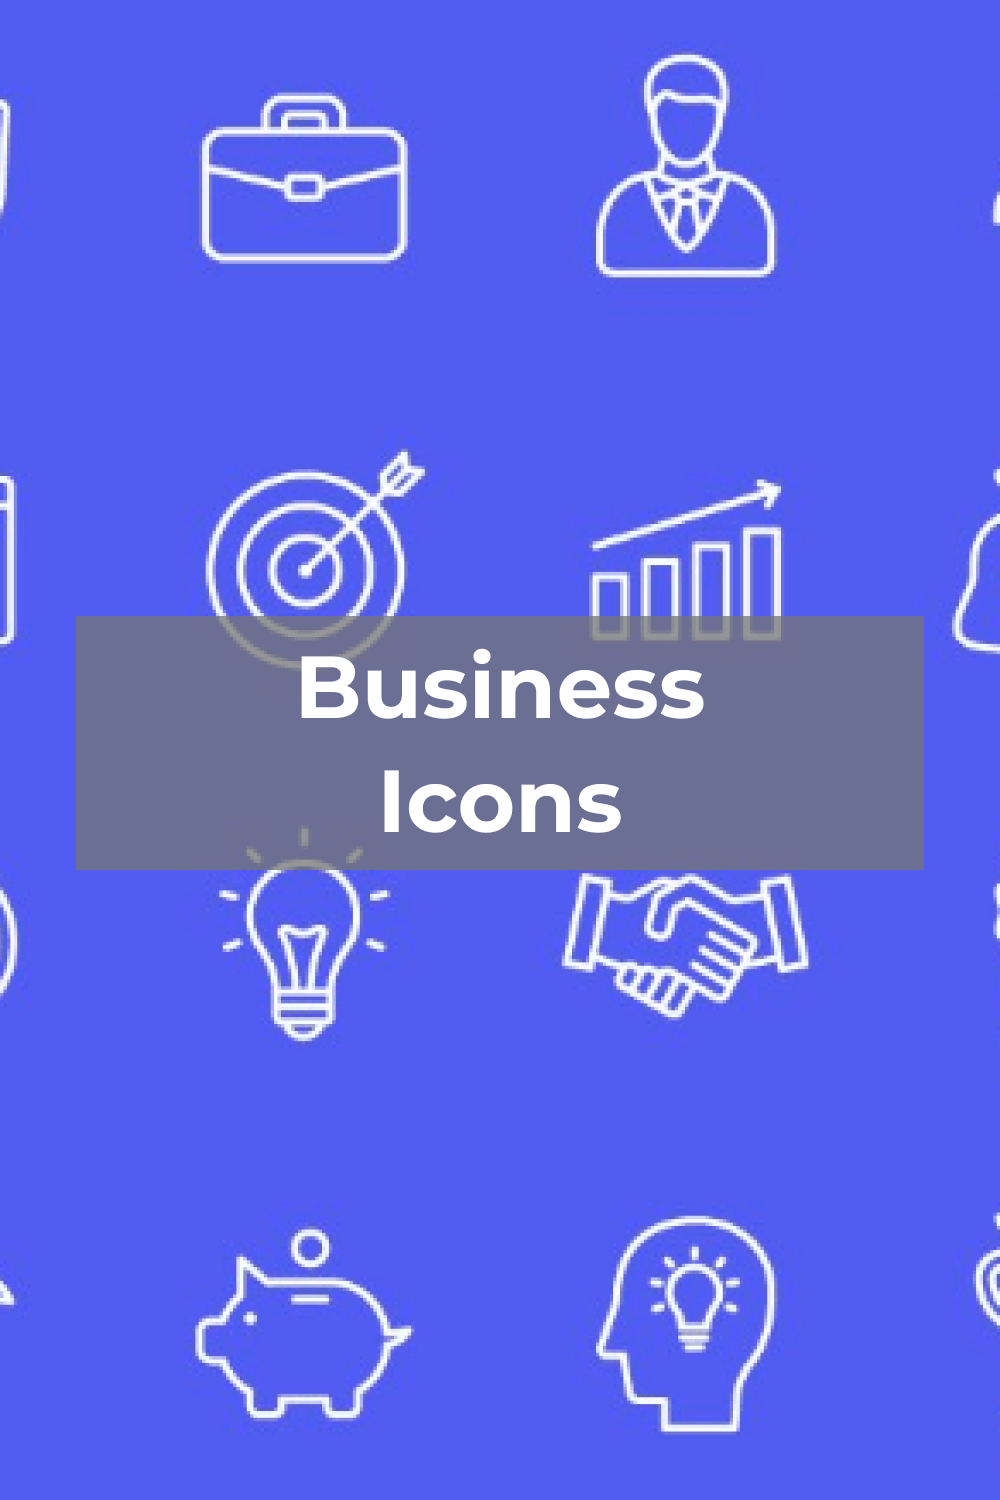 Business Icons for presentation.